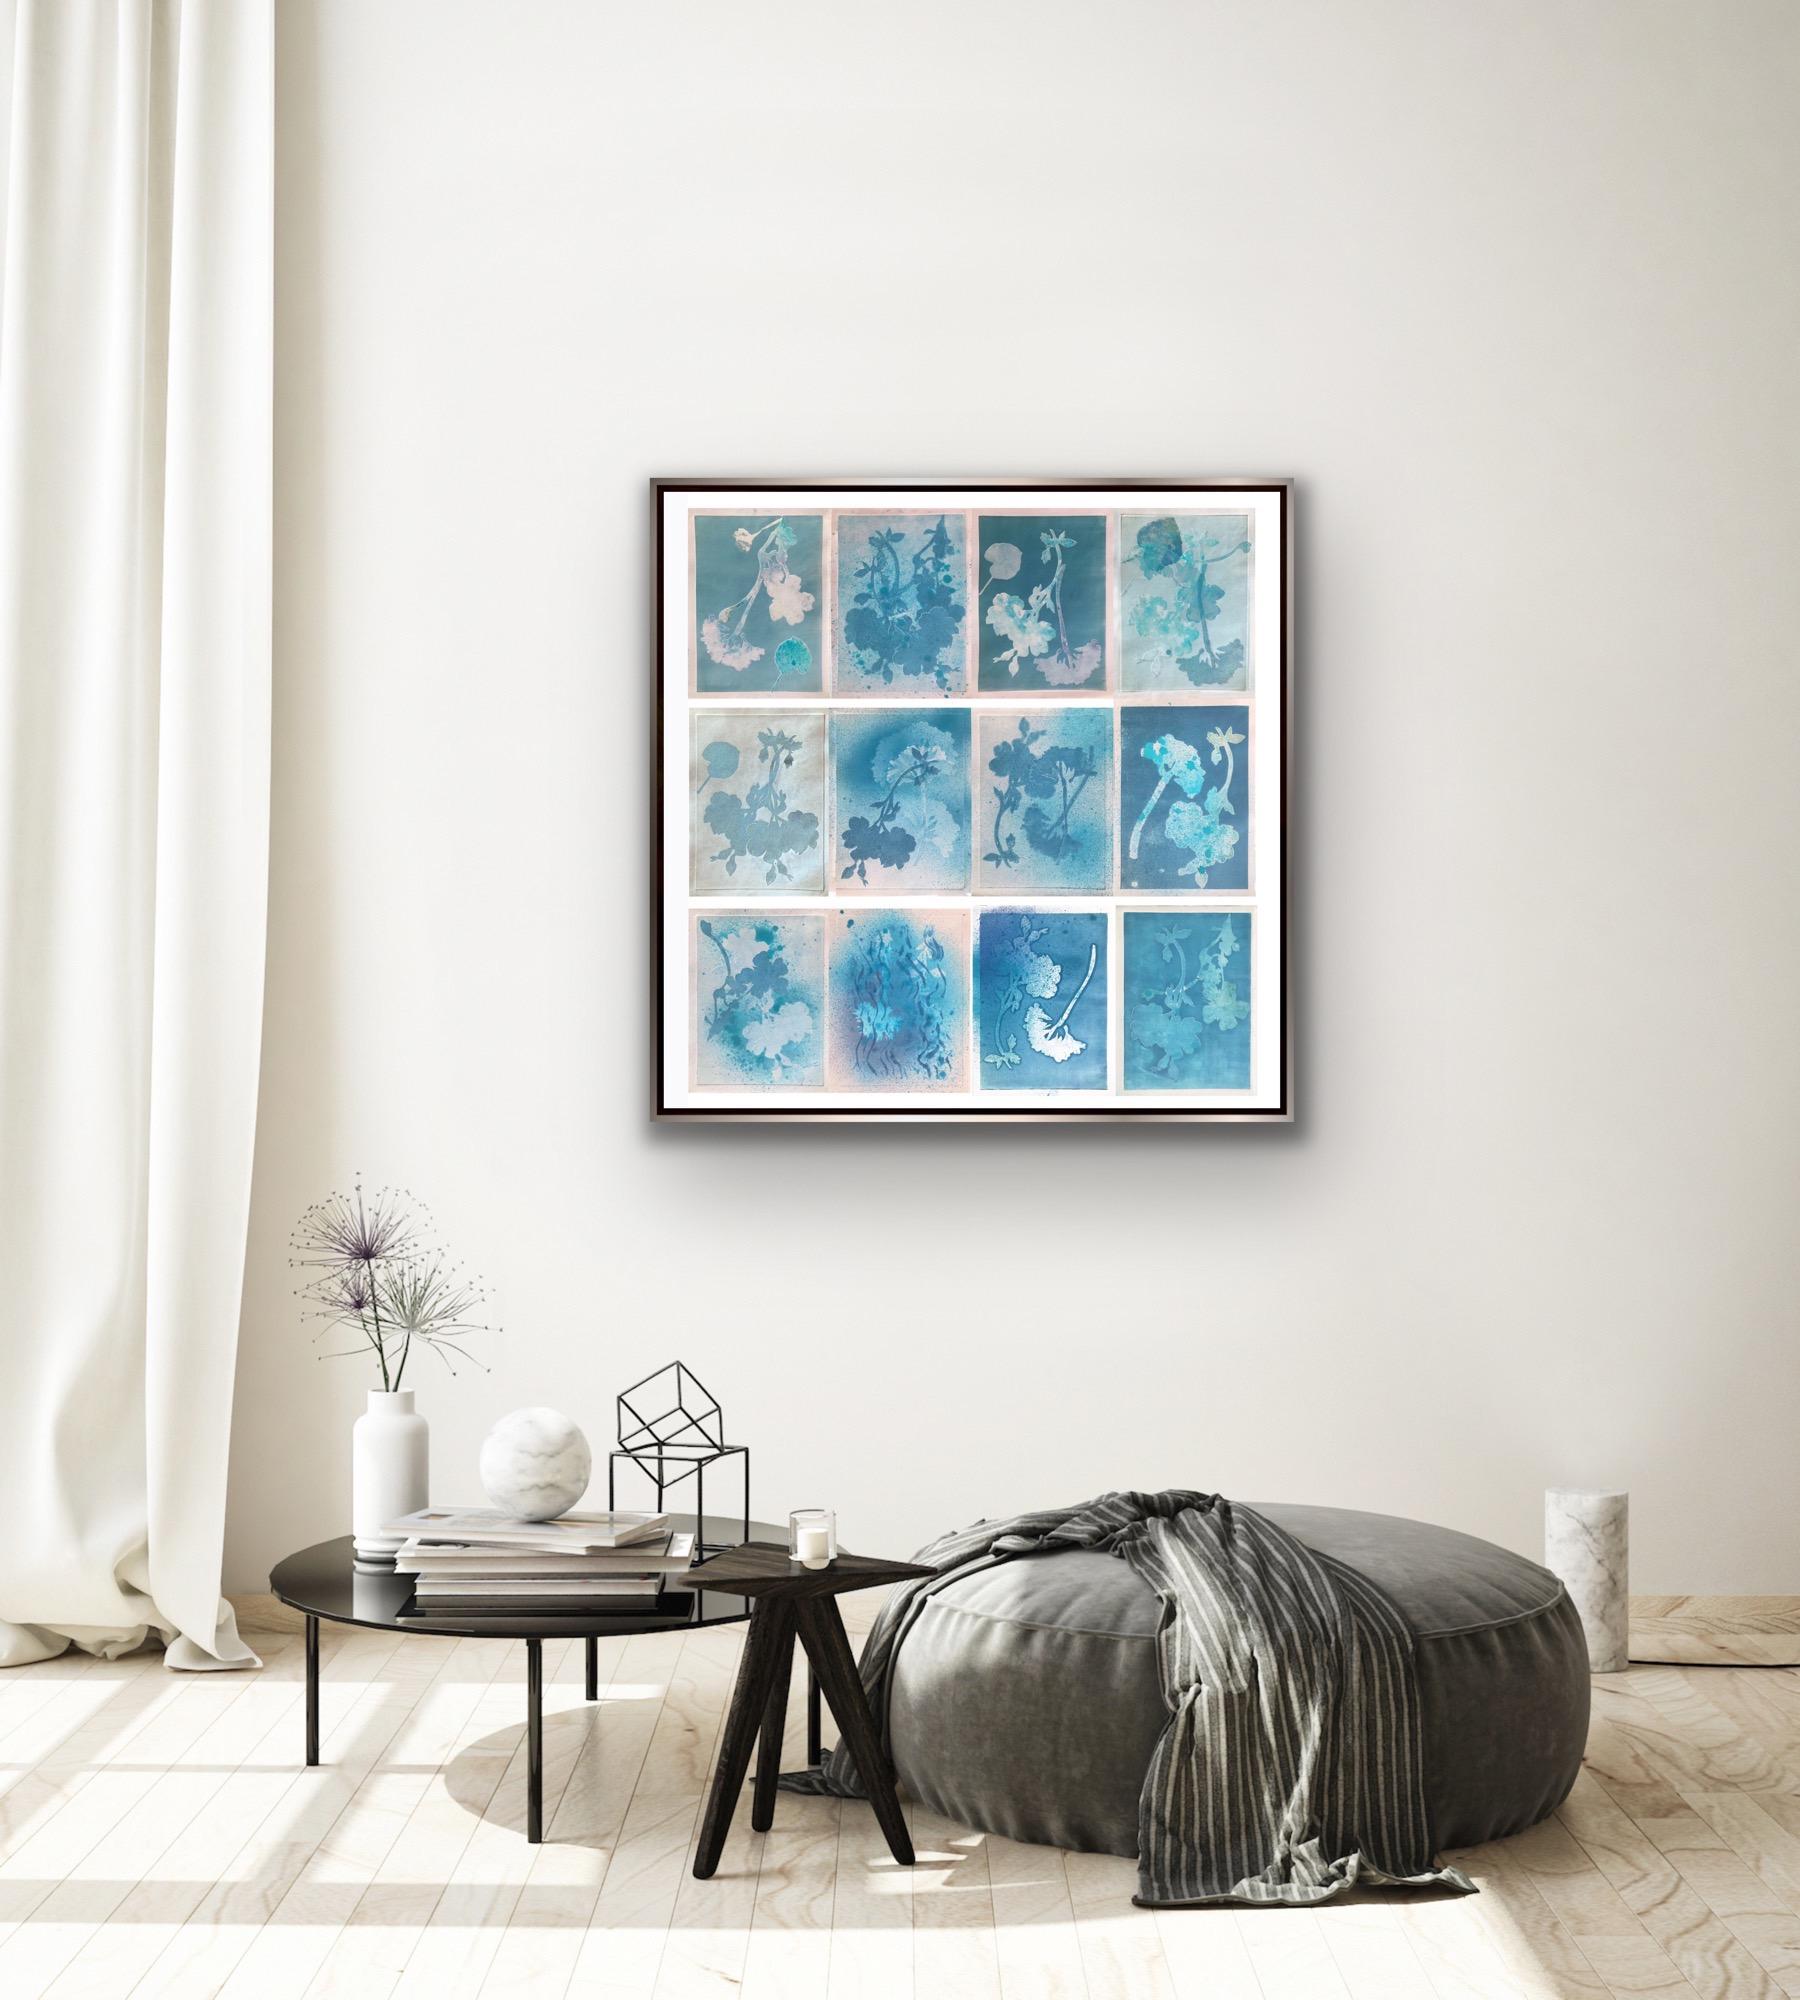 Flower Shadows I, 12 individual floral monotypes together in a grid - Blue Still-Life Print by Lois Bender